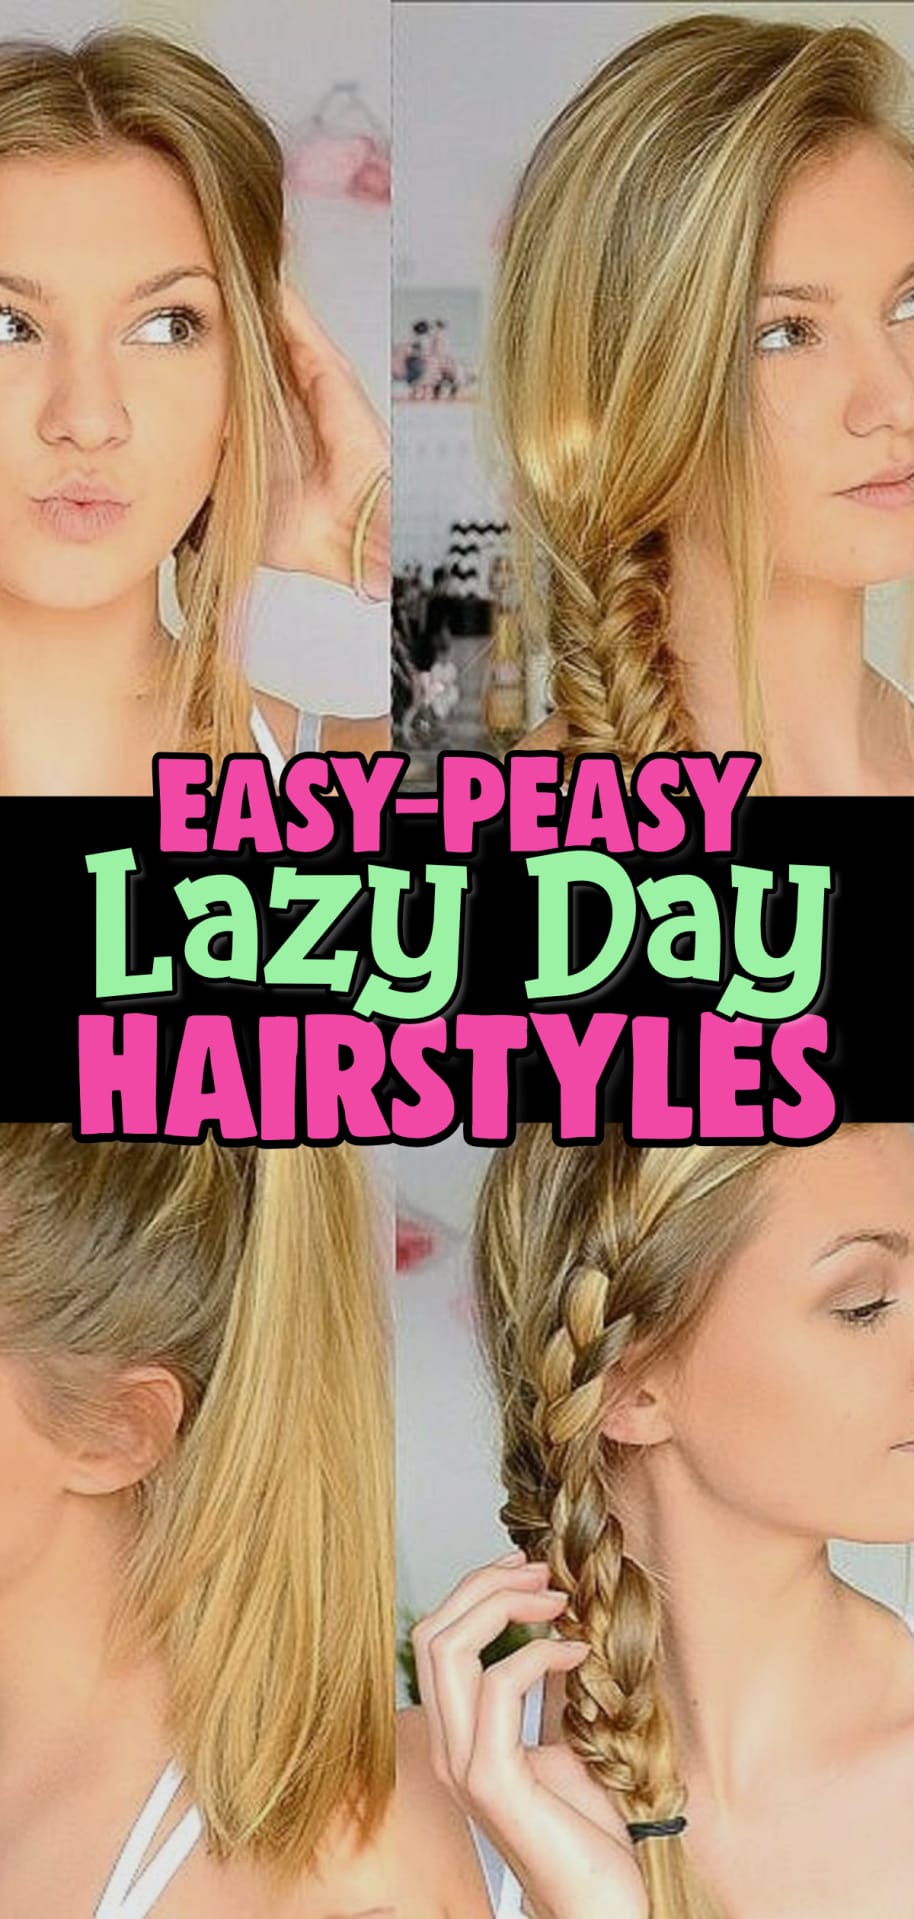 Lazy Hairstyles!  Easy Lazy Day Hairstyles and Hair Ideas for those Running Late quick hairstyle ideas needs of lazy girls